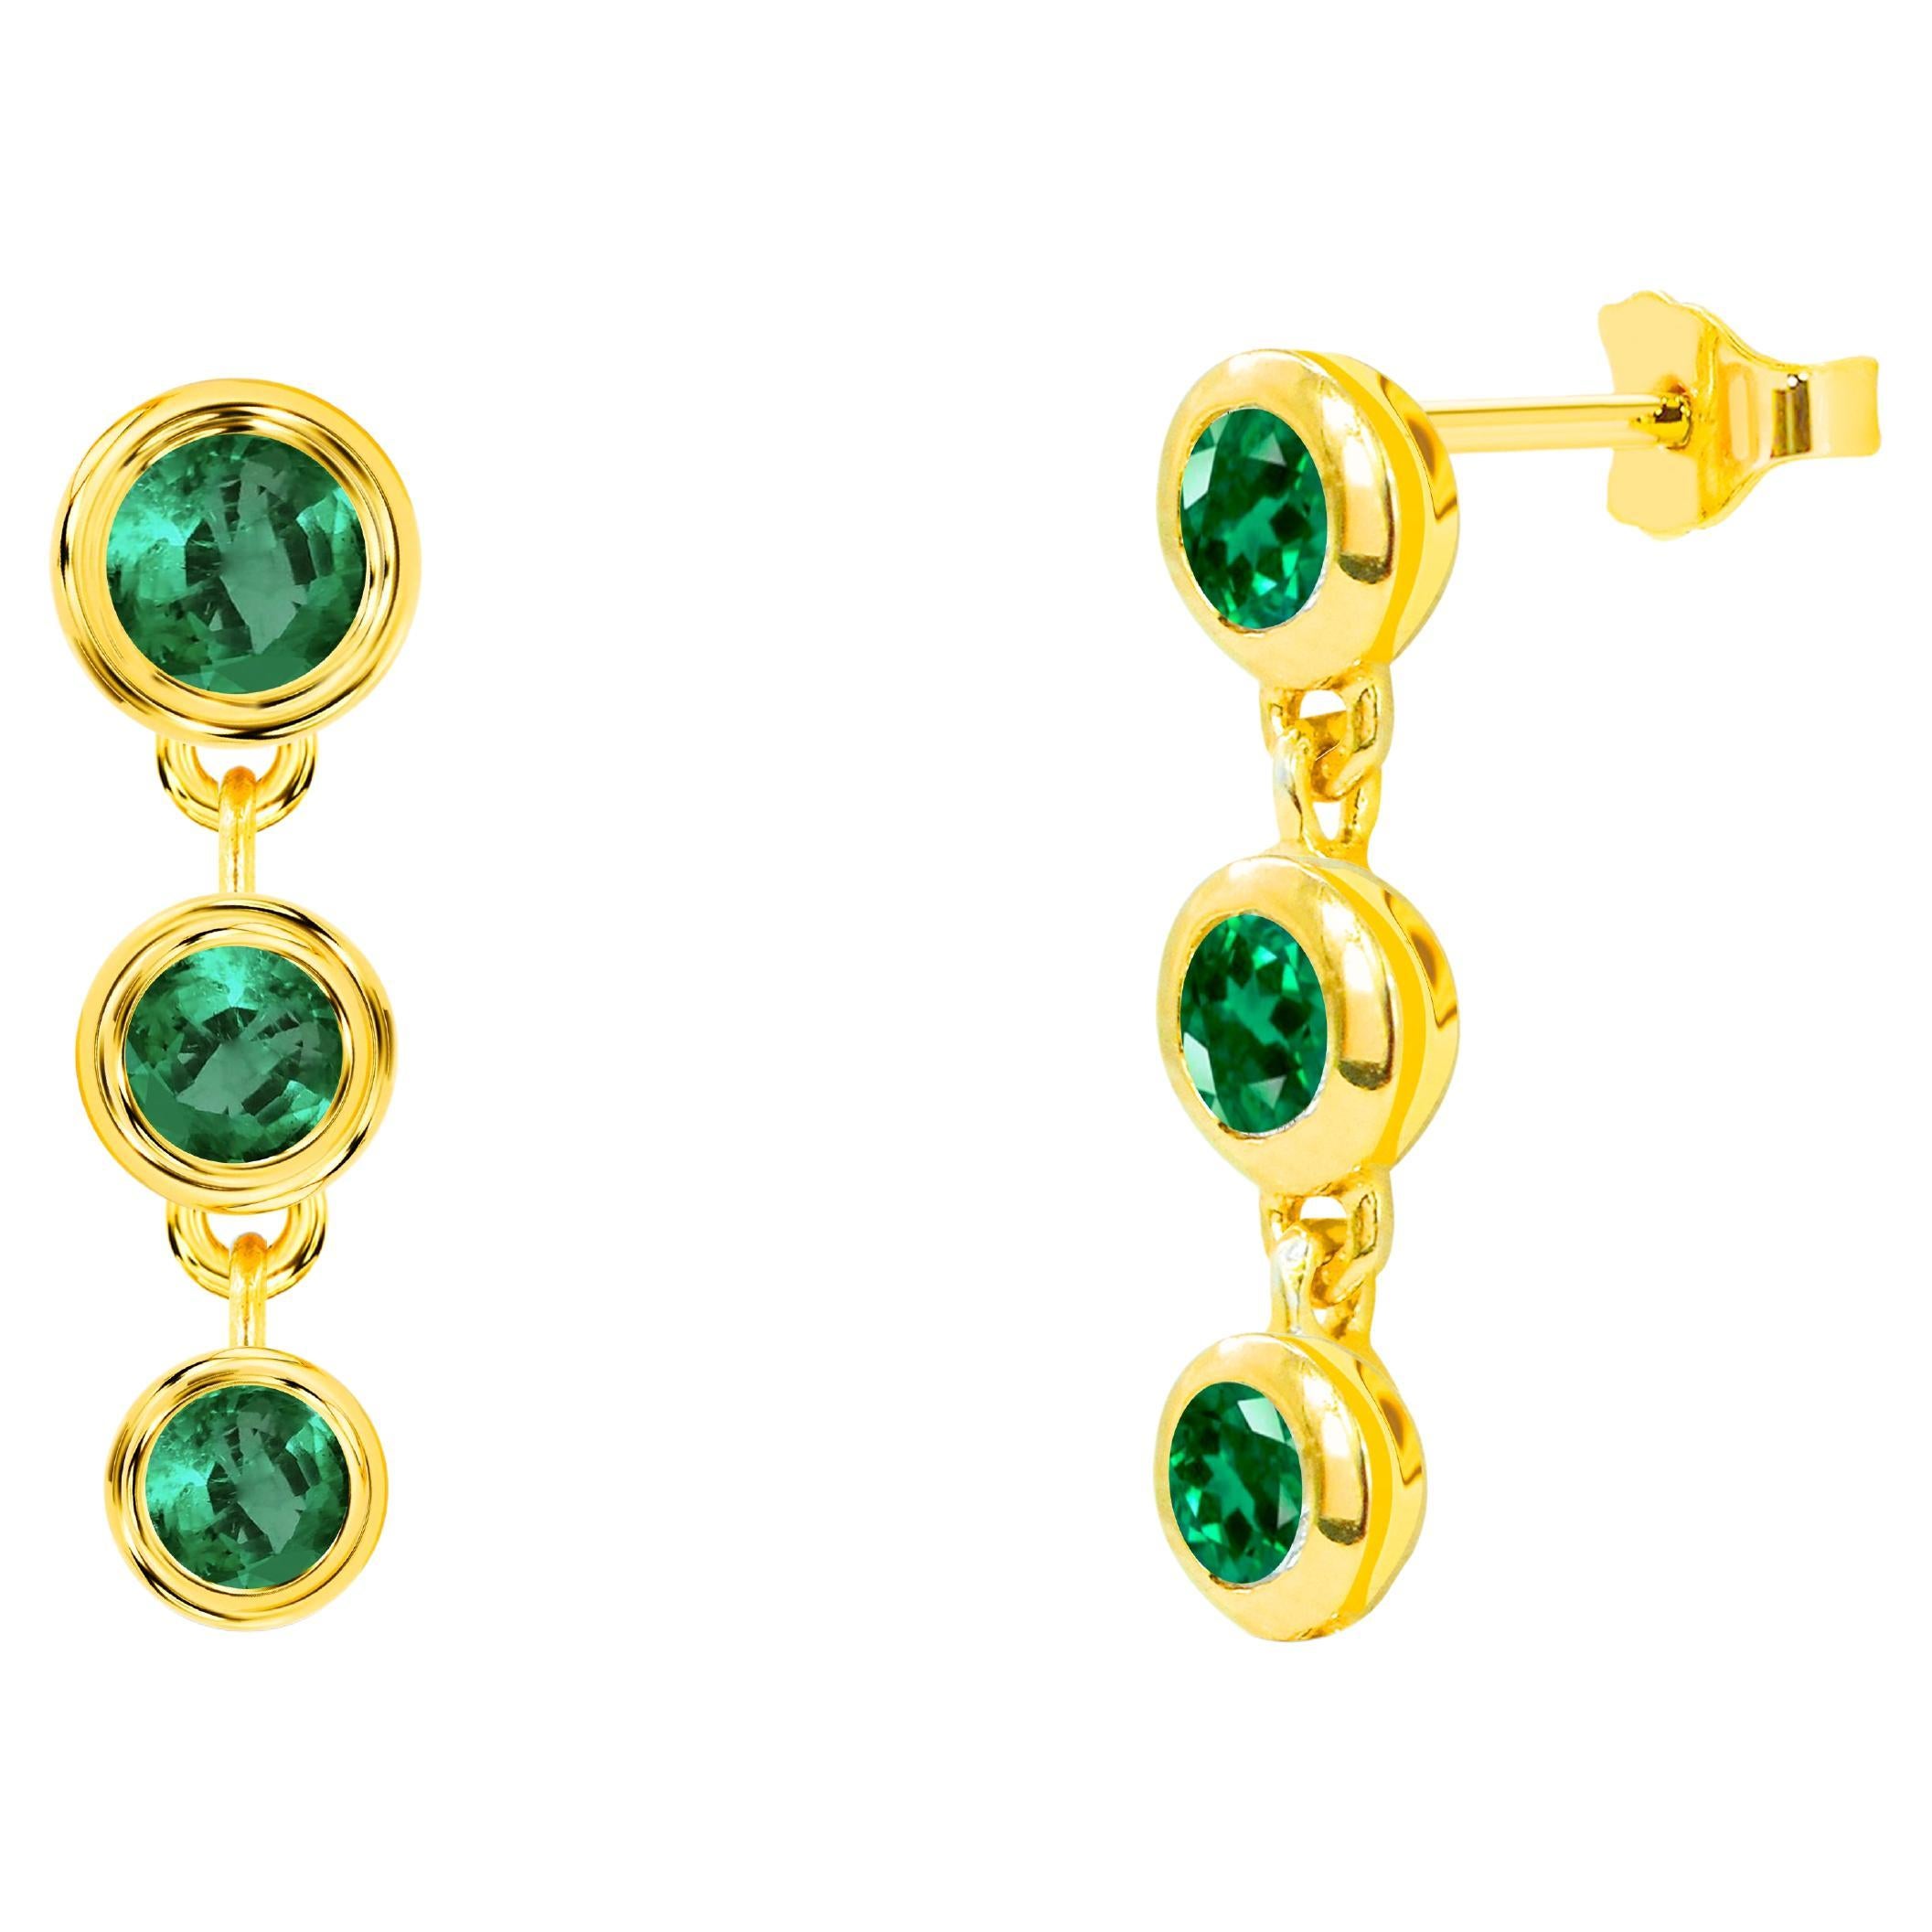 0.26ct Emerald Ruby and Sapphire Bezel Studs Earrings in 14k Gold For Sale